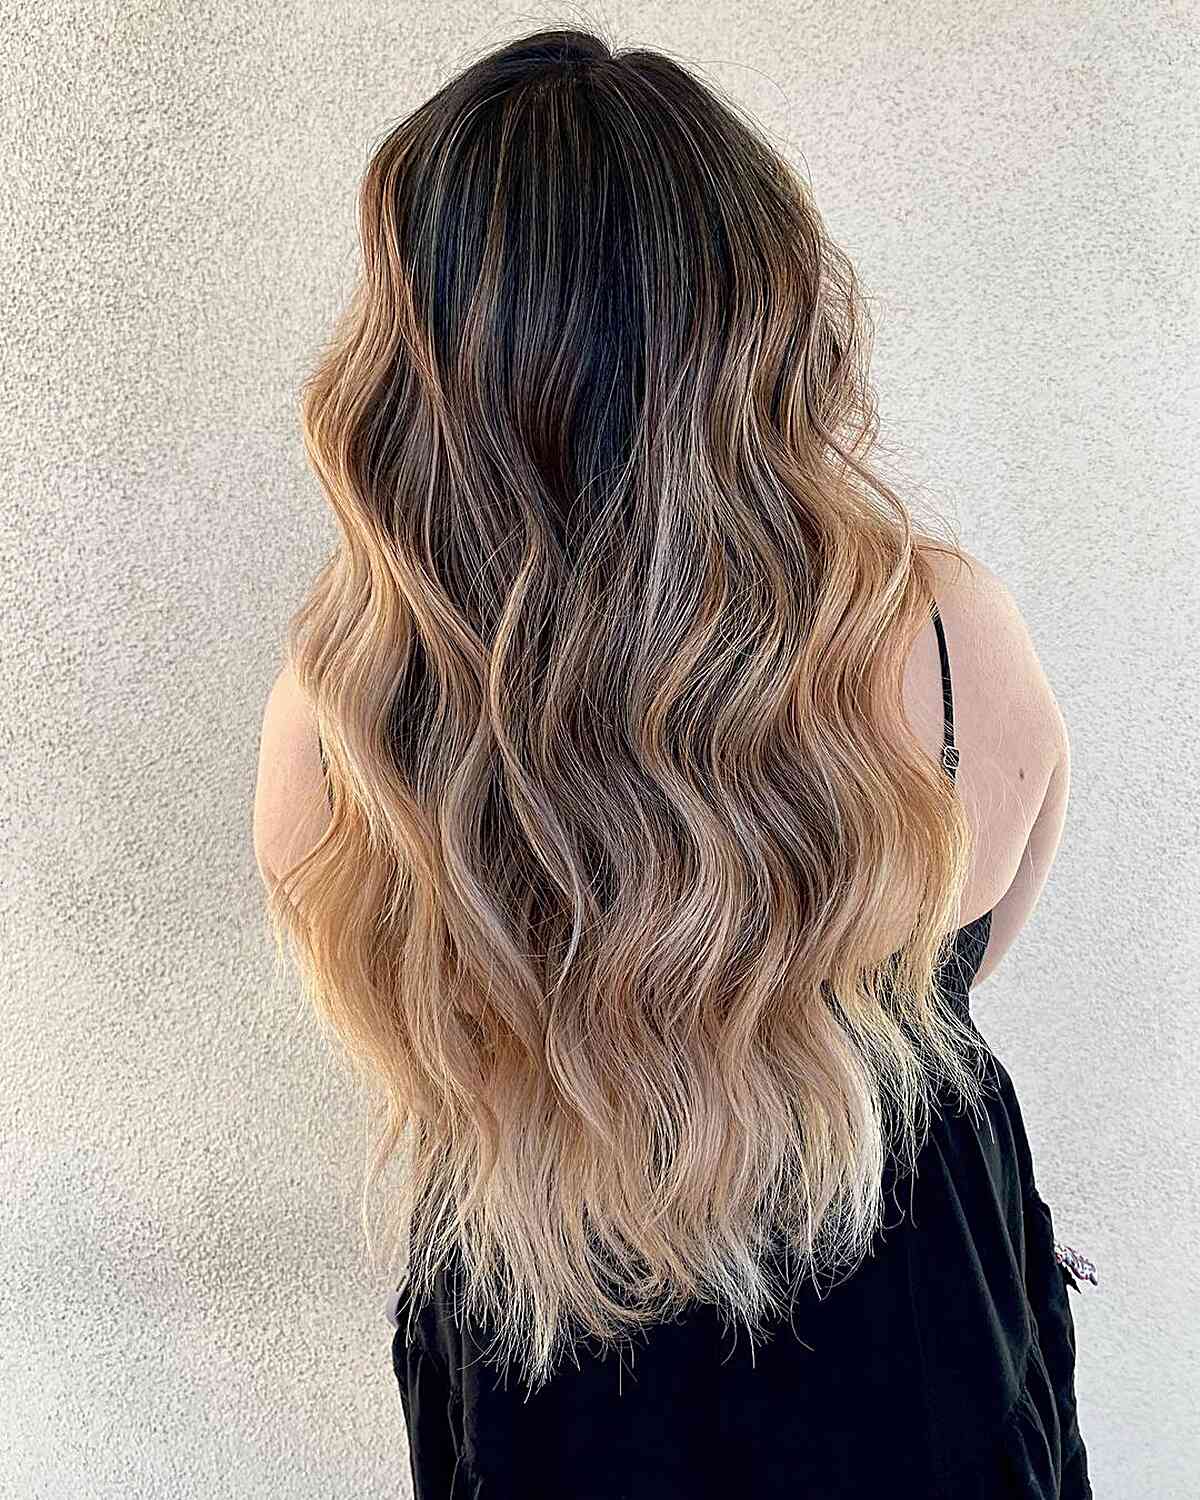 Super Long Haircut with Golden Balayage and Beach Waves